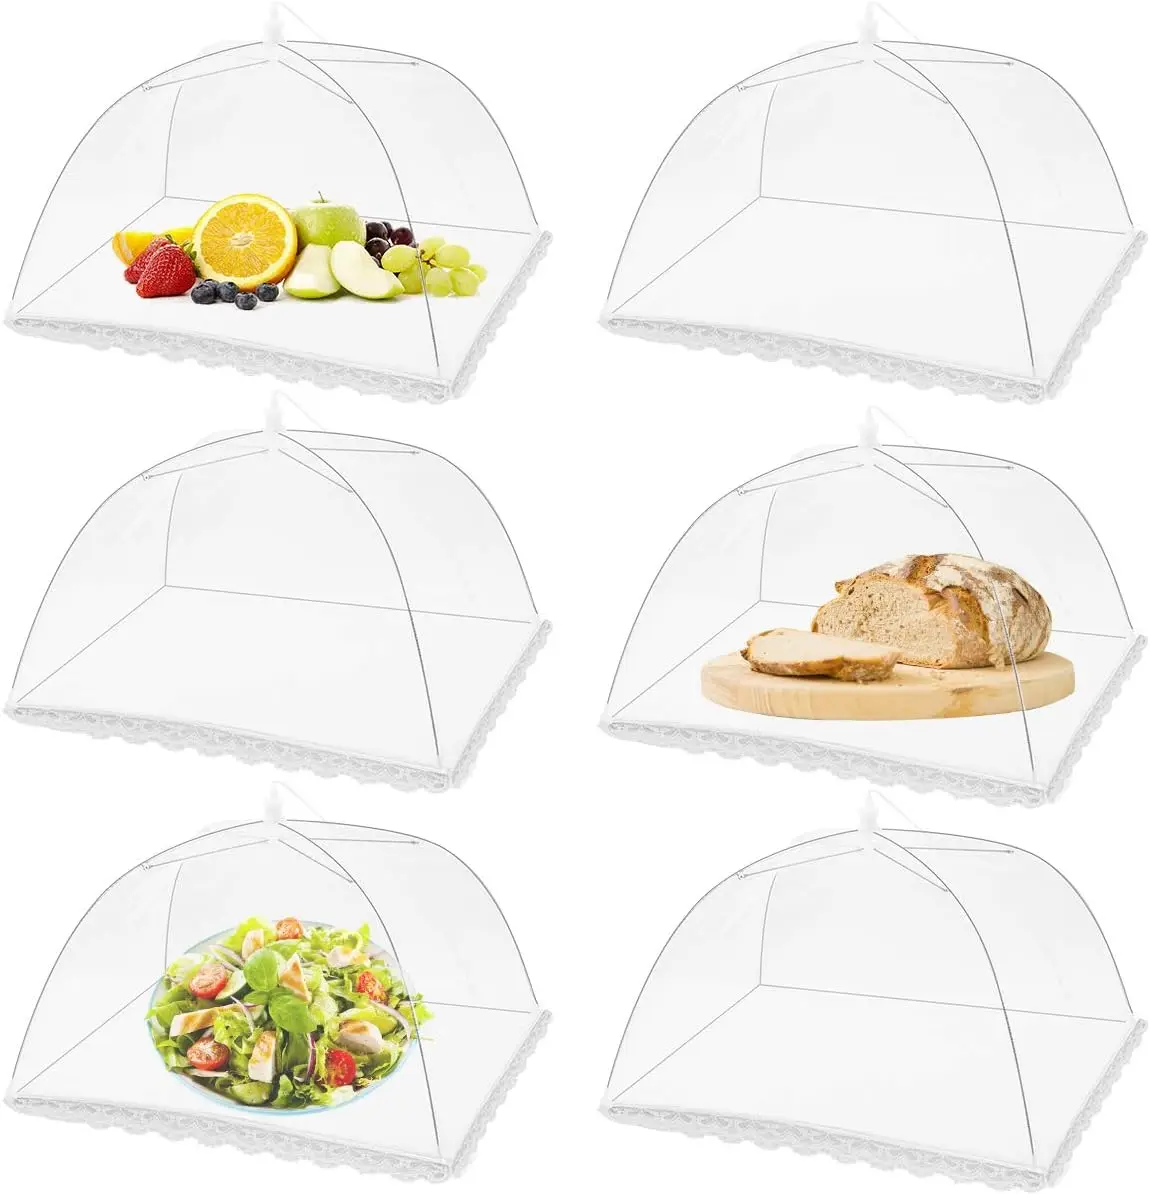 

Outdoor Picnic Mesh Food Cover for Outdoor and Camping Tents, Umbrellas Food Mesh Cover for Barbecue Prevention, Foldable Inches